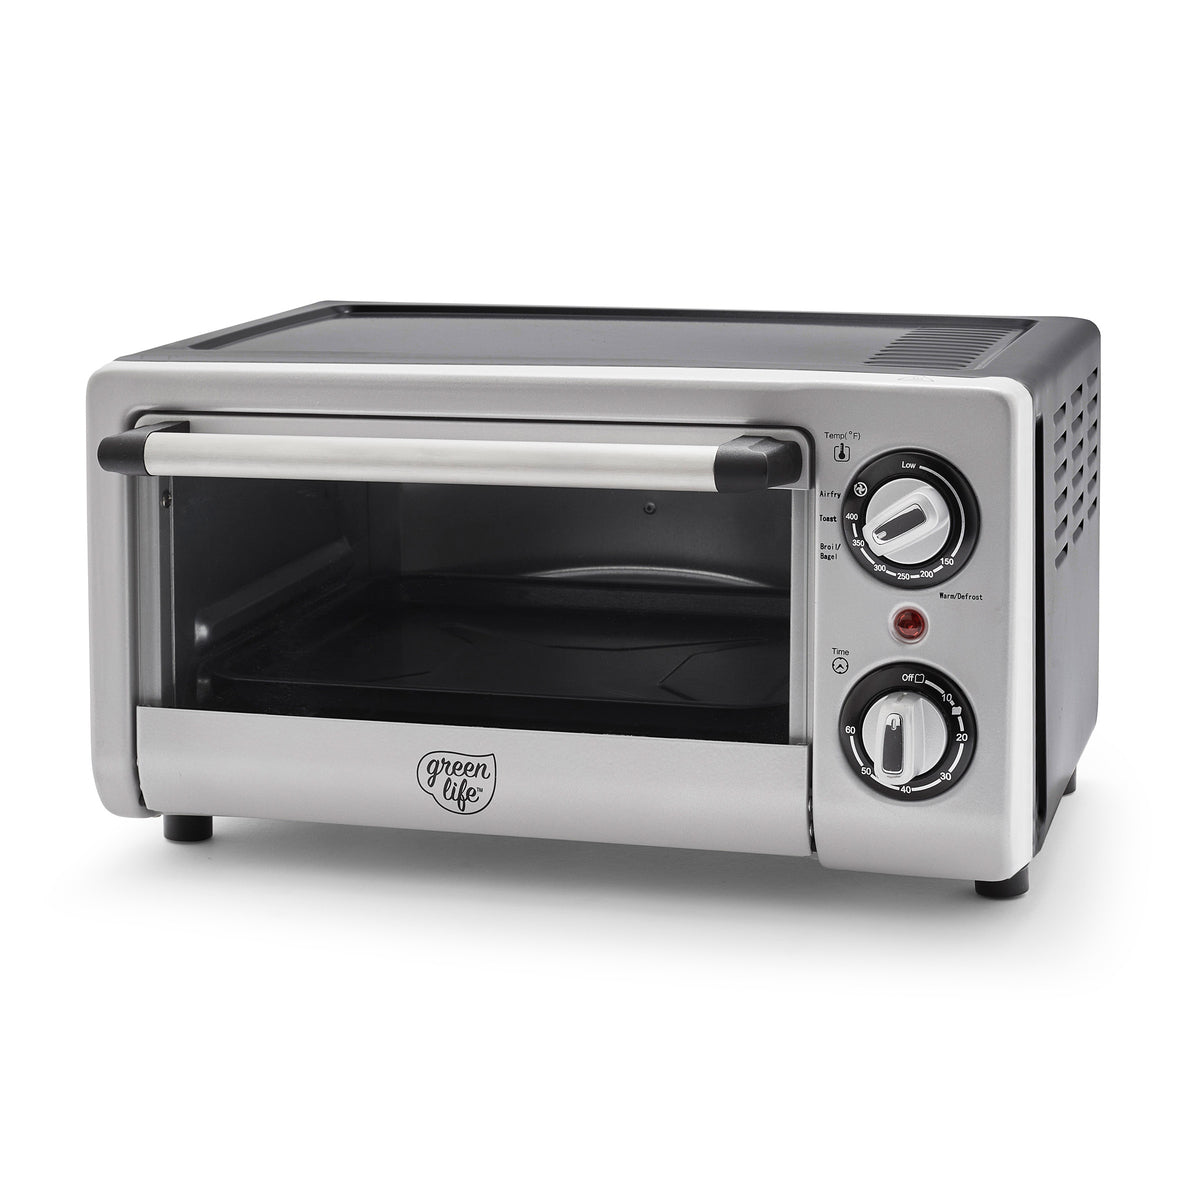 Compact Air Fryer Toaster Oven (Stainless Steel)